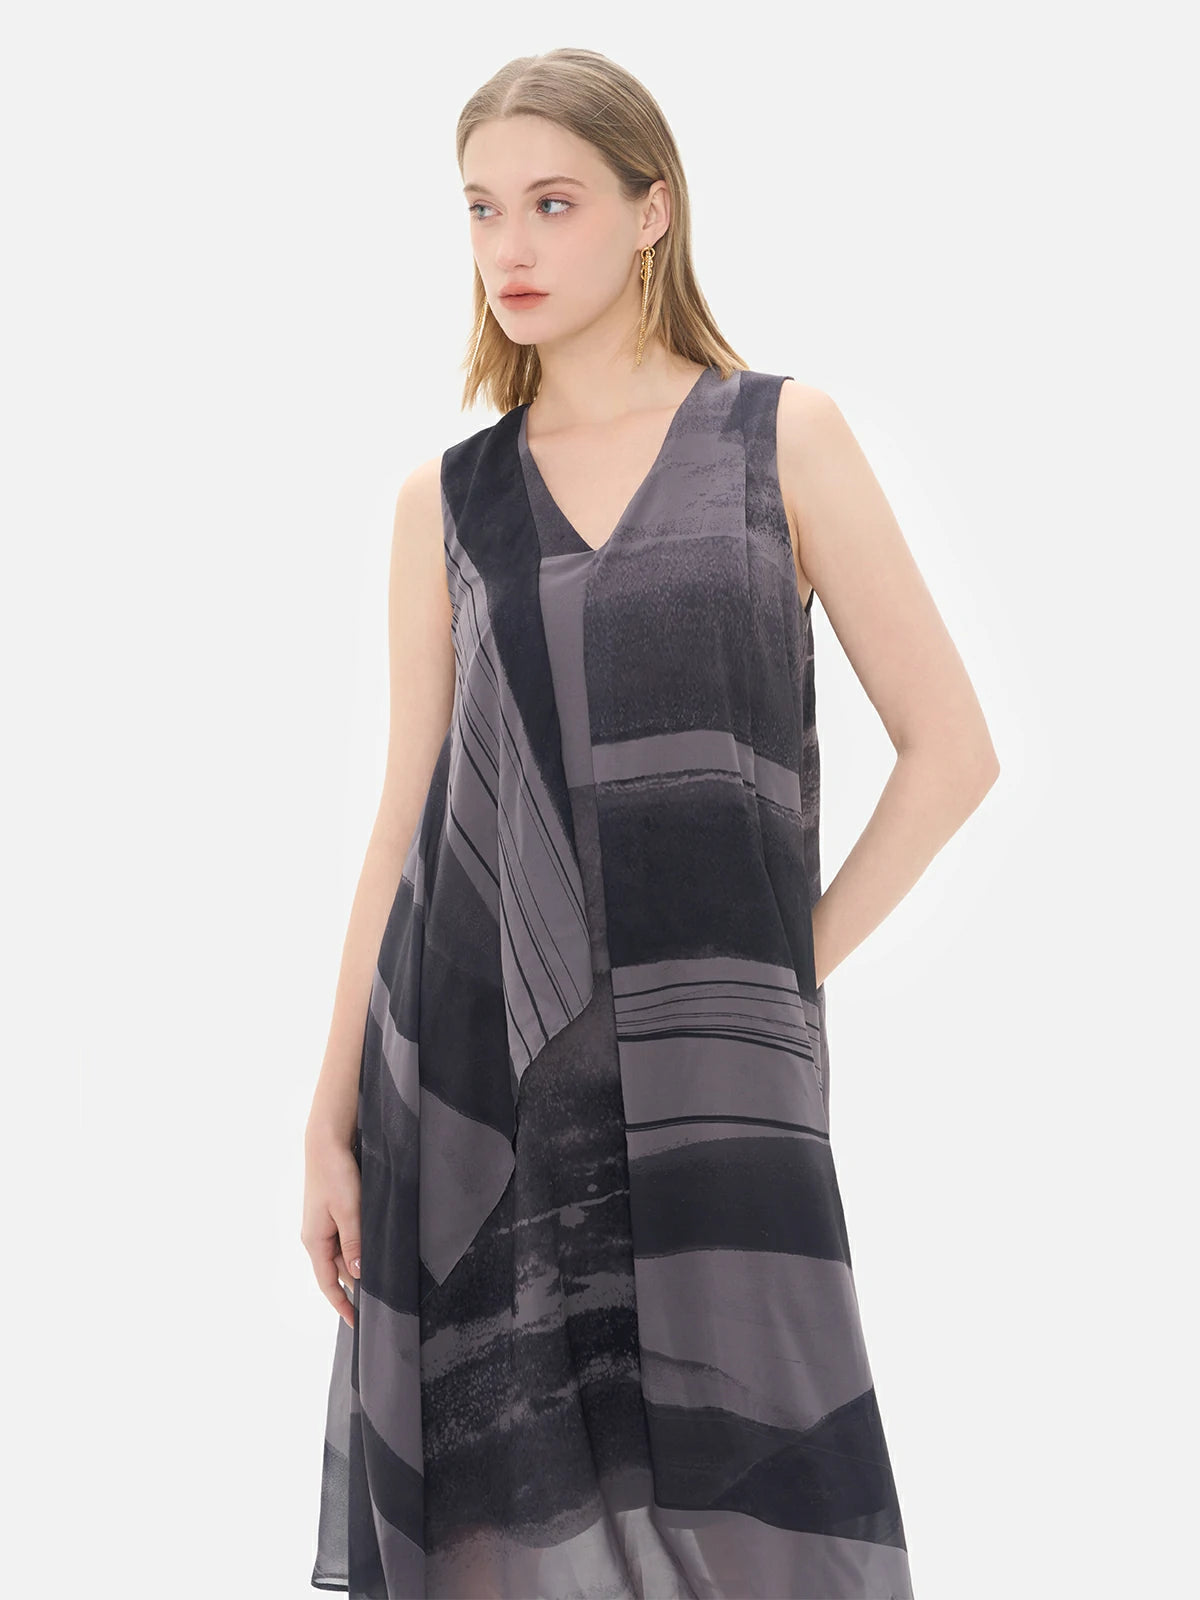 Explore the versatility of this sleeveless chiffon dress, blending an artistic irregular print with a refreshing and airy design.